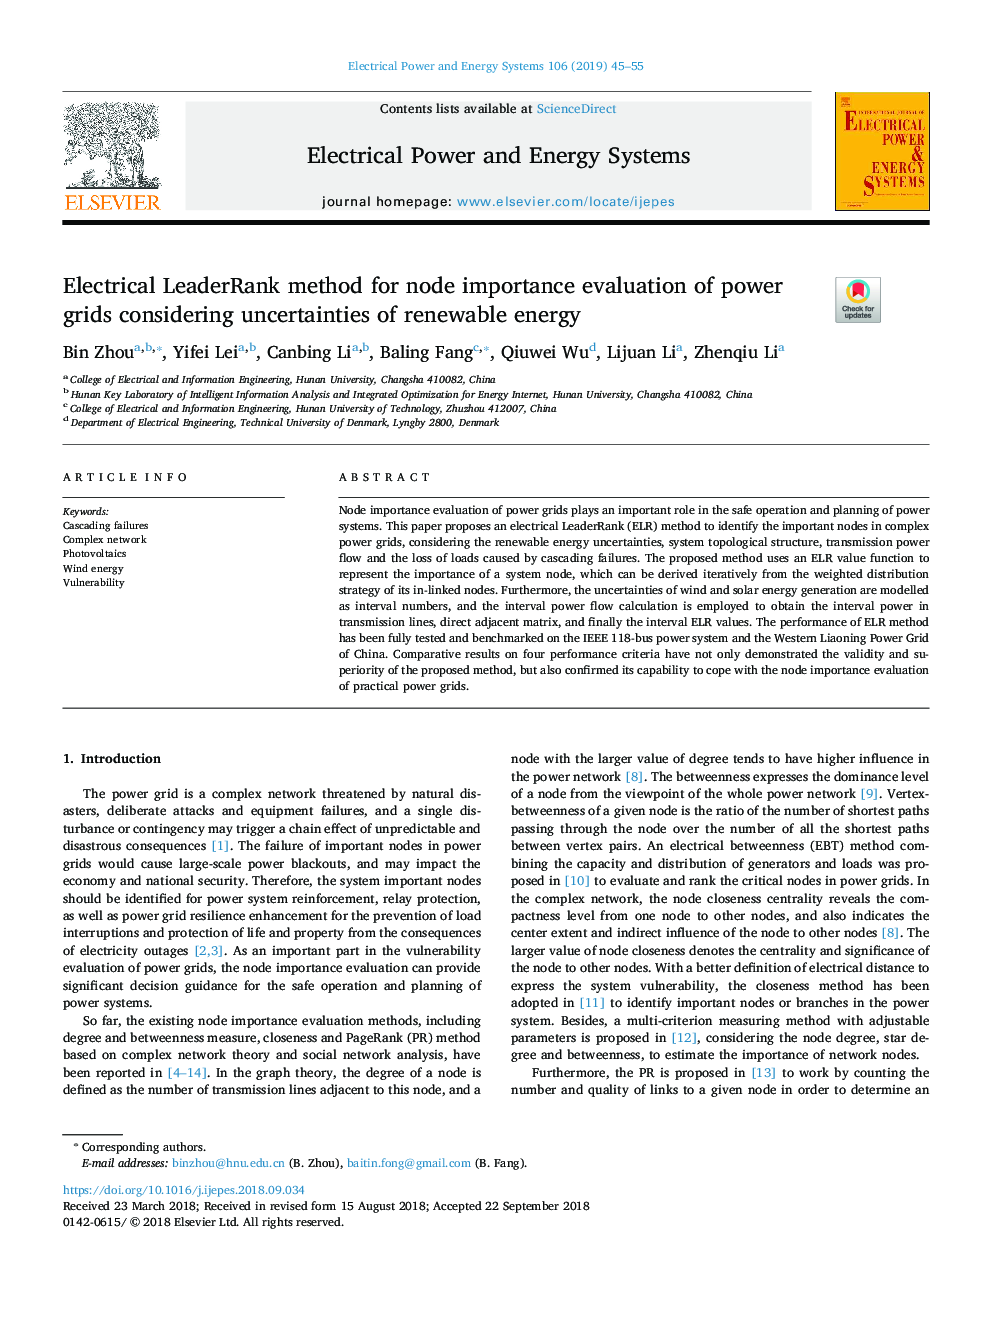 Electrical LeaderRank method for node importance evaluation of power grids considering uncertainties of renewable energy